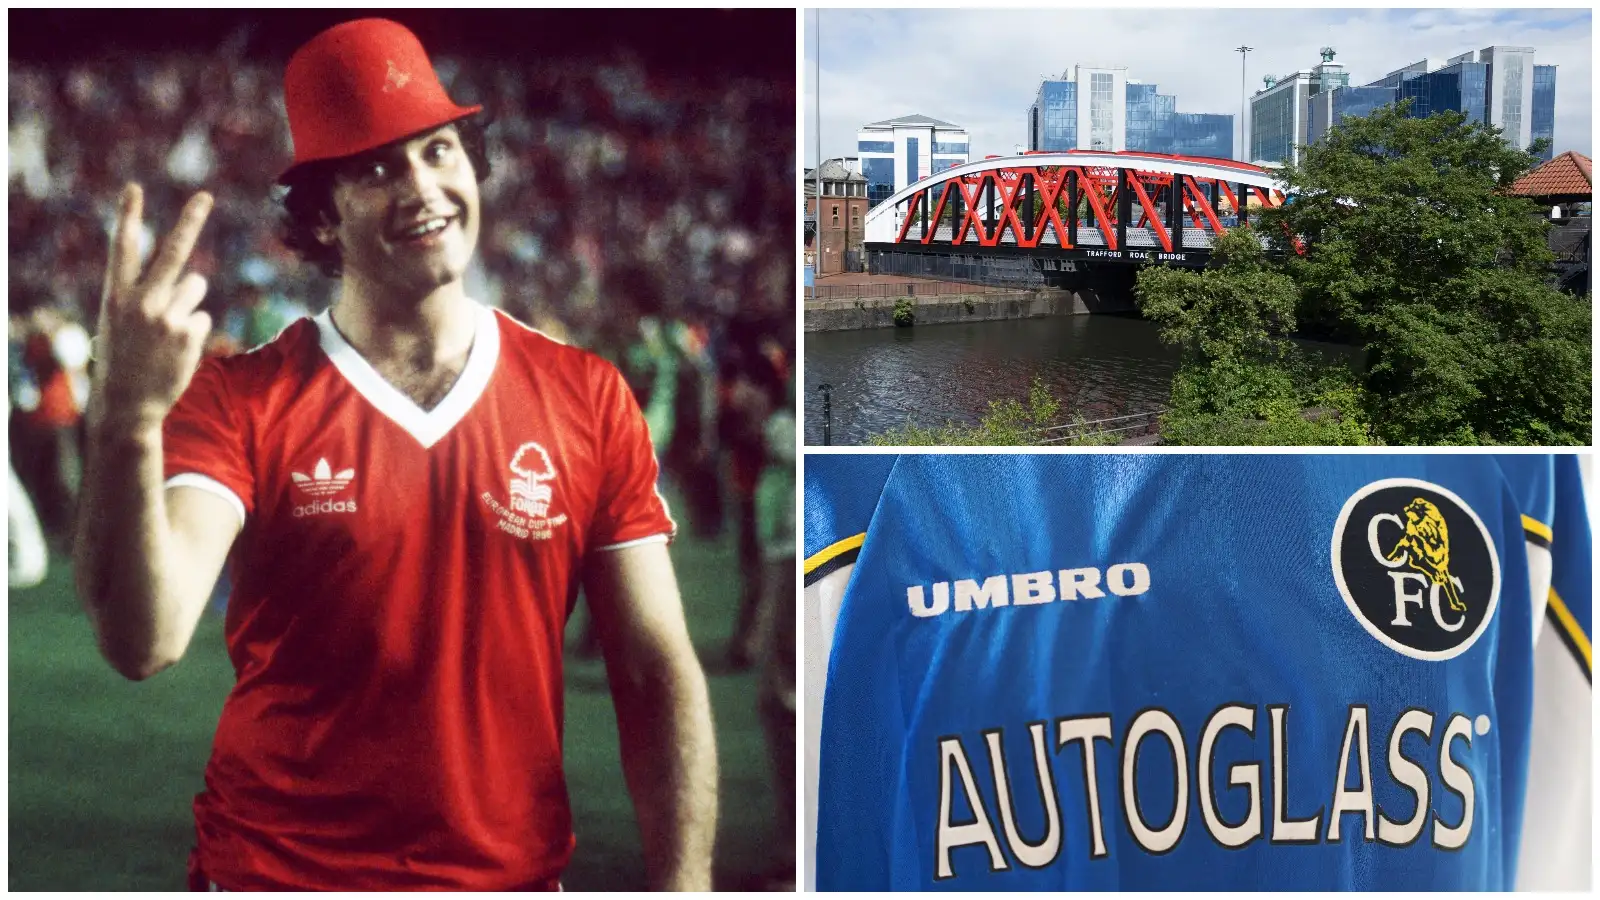 The inspiration behind Nottingham Forest, Manchester United, and Chelsea's new kits.